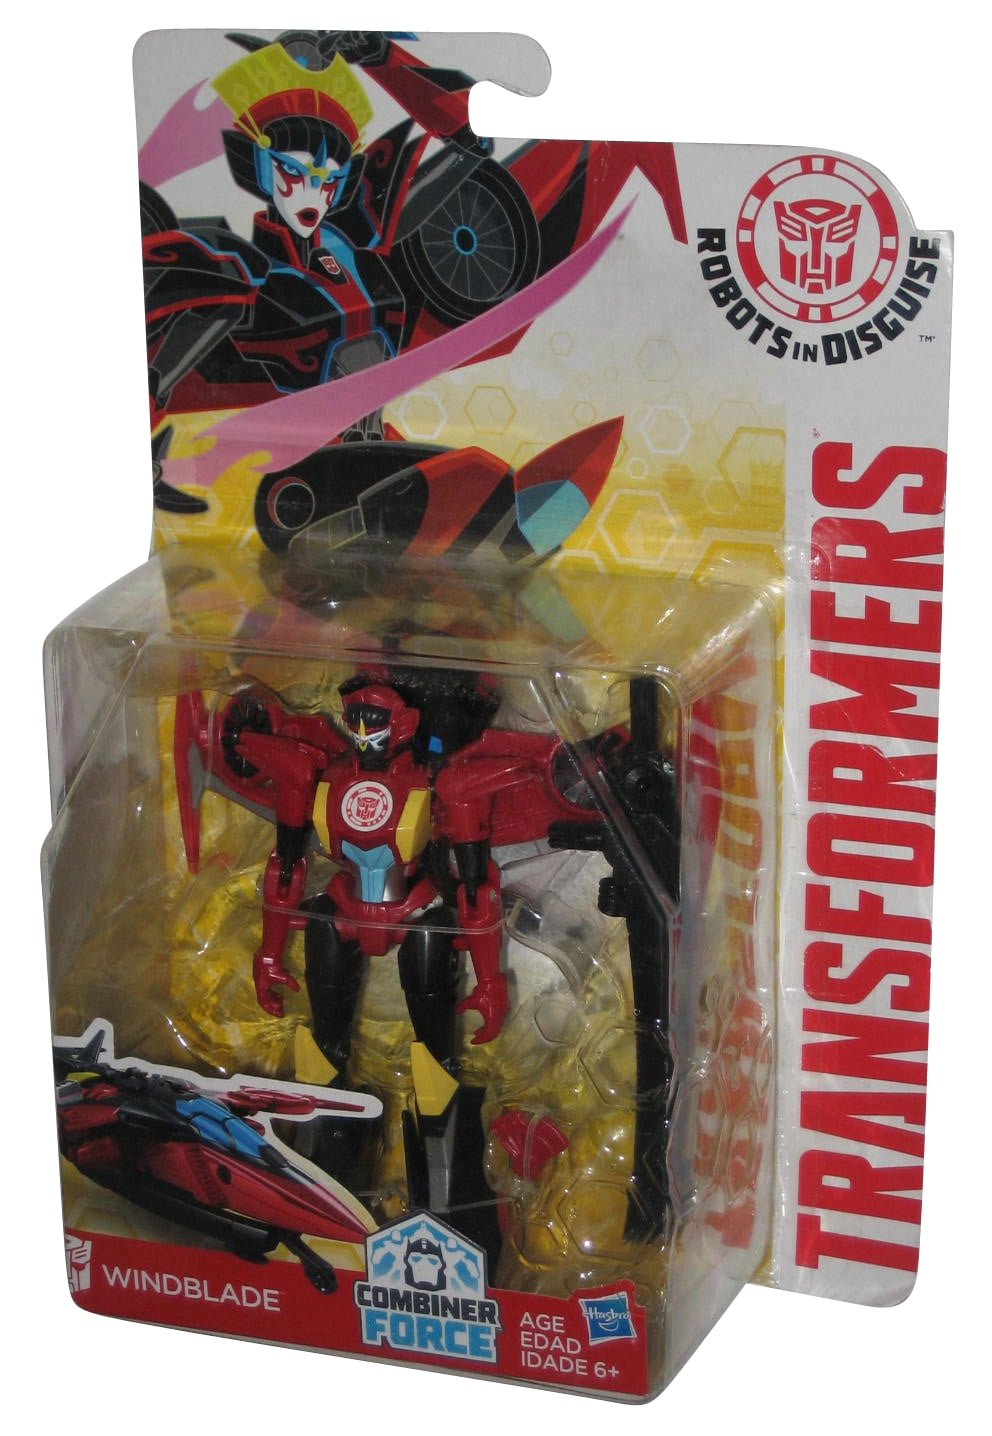 New Transformers Combiner Force Windblade Figure Robots In Disguise Official 